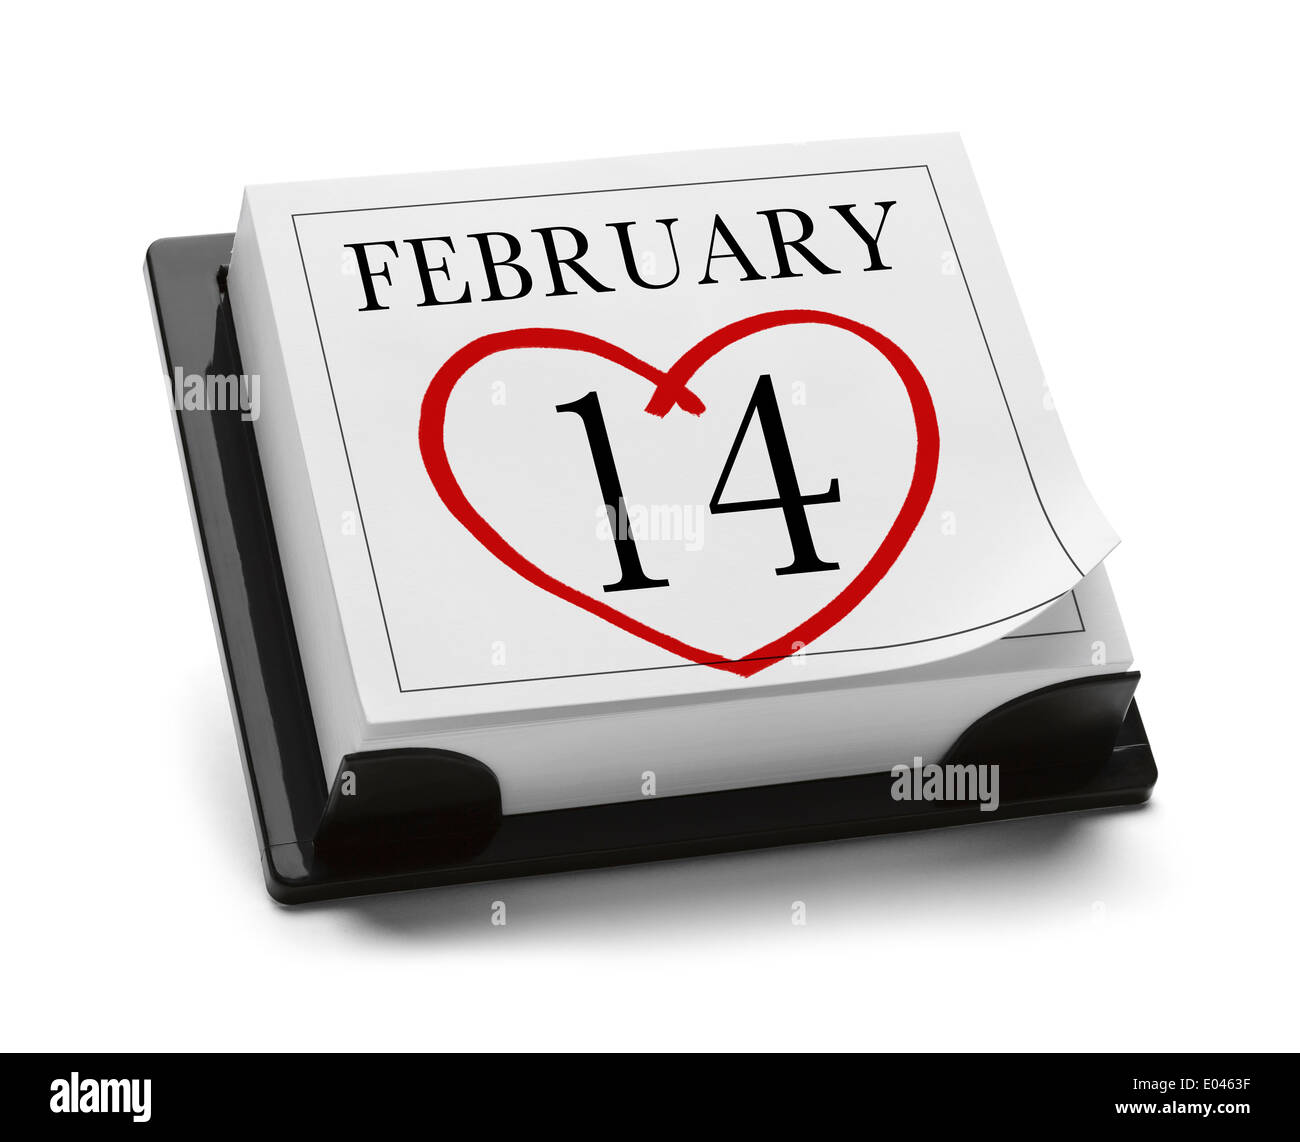 Valentines Day Calendar Feb 14th Isolated on White Background. Stock Photo